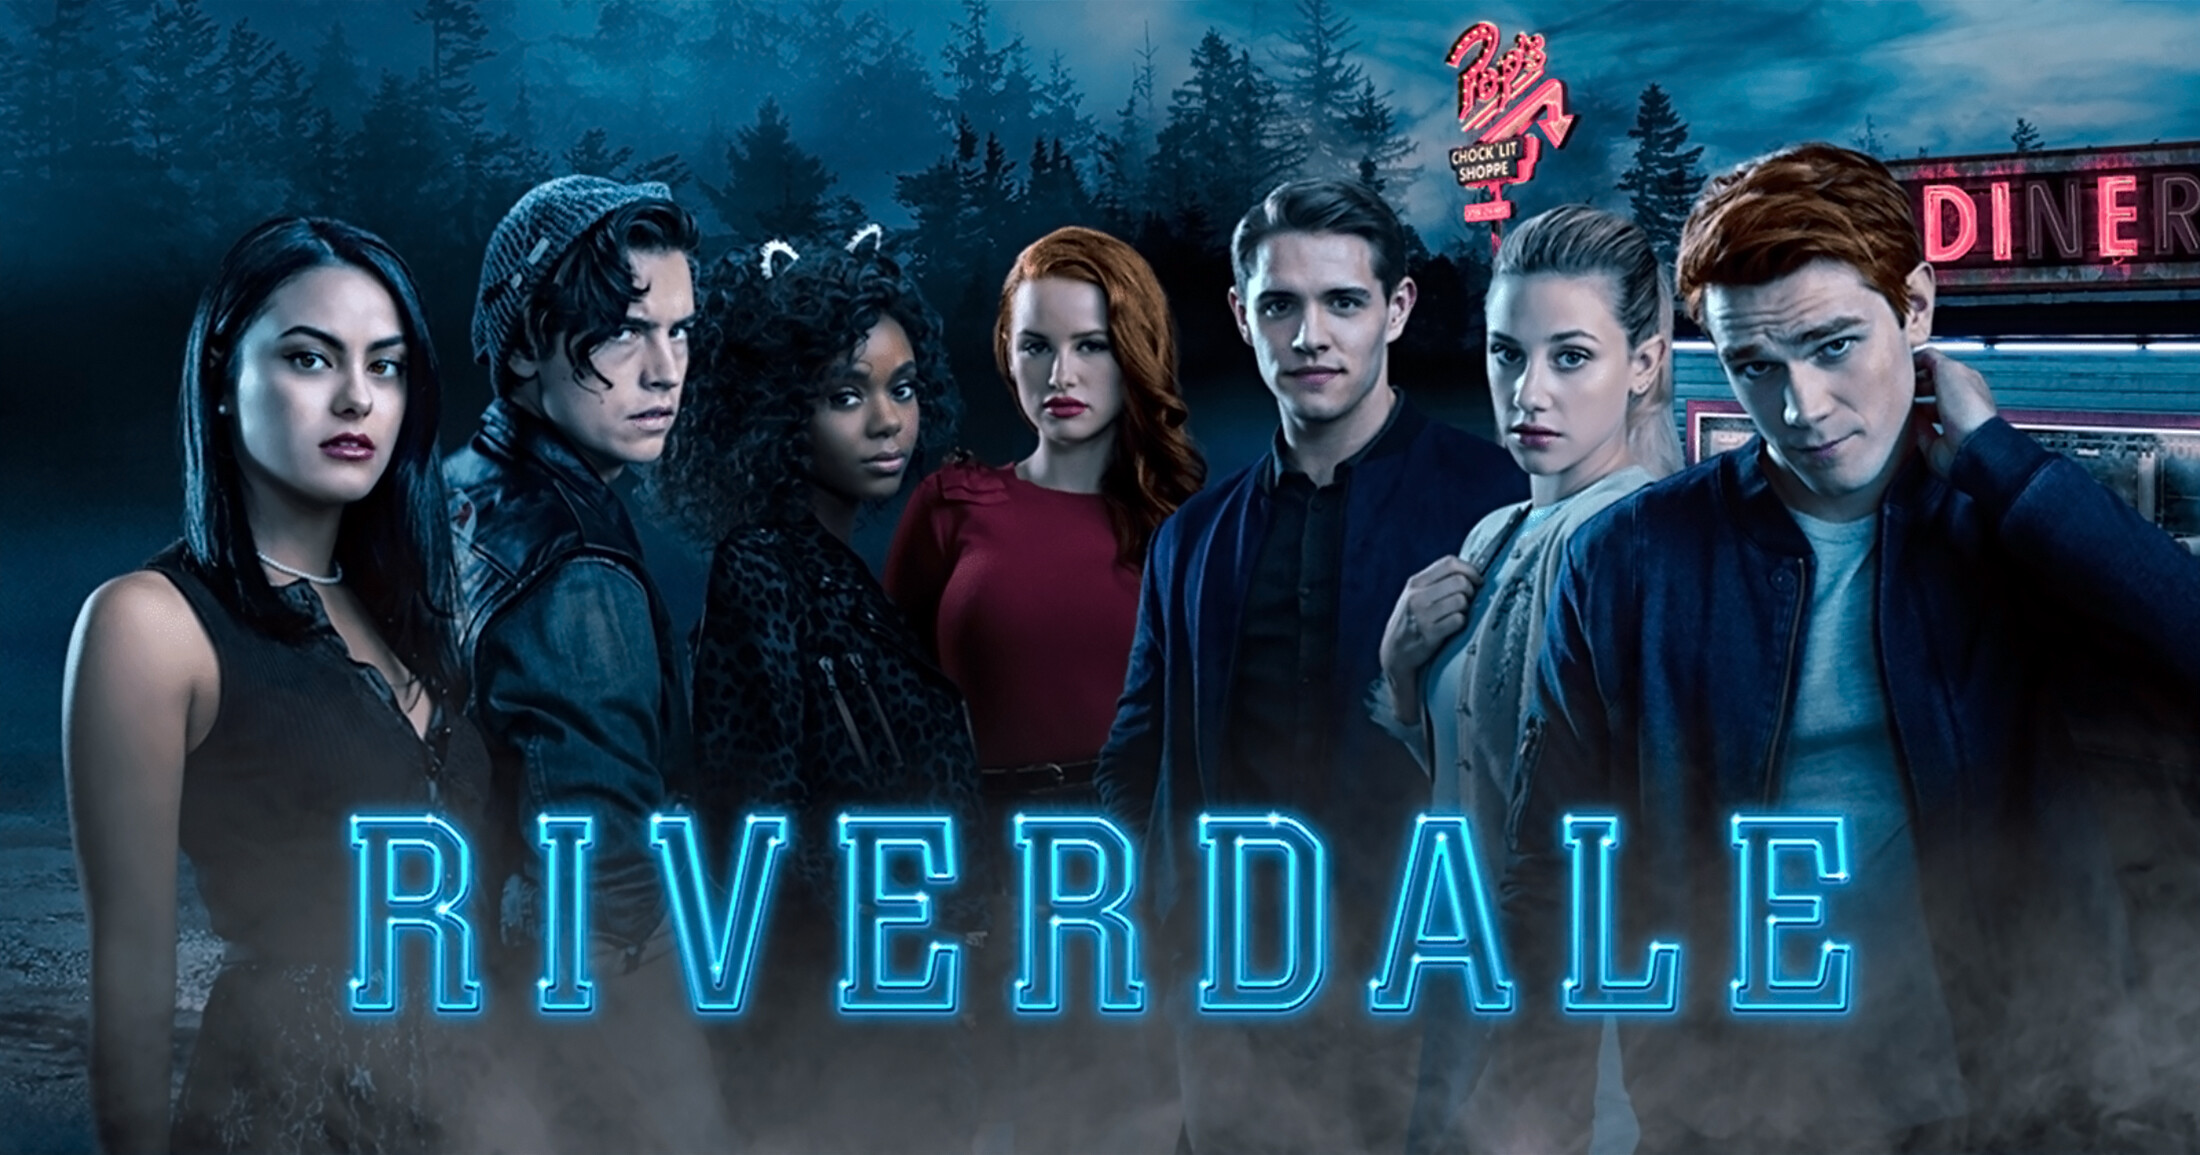 Riverdale (TV Series): The show was adapted by Archie Comics chief creative officer Roberto Aguirre-Sacasa. 2200x1160 HD Wallpaper.